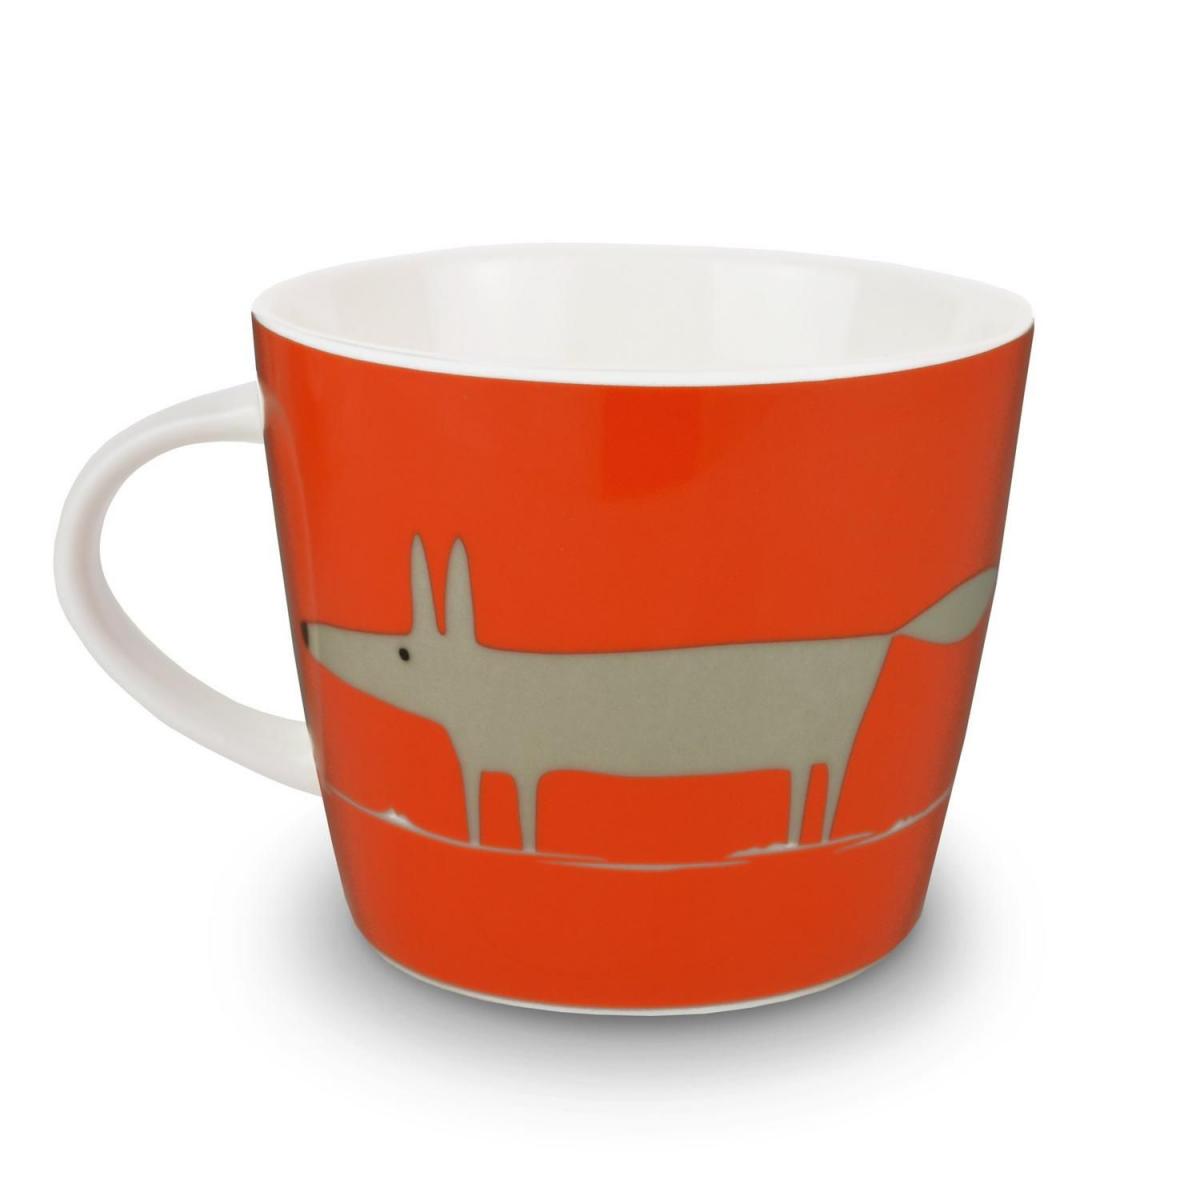  Mugs And Cups SC-0130 